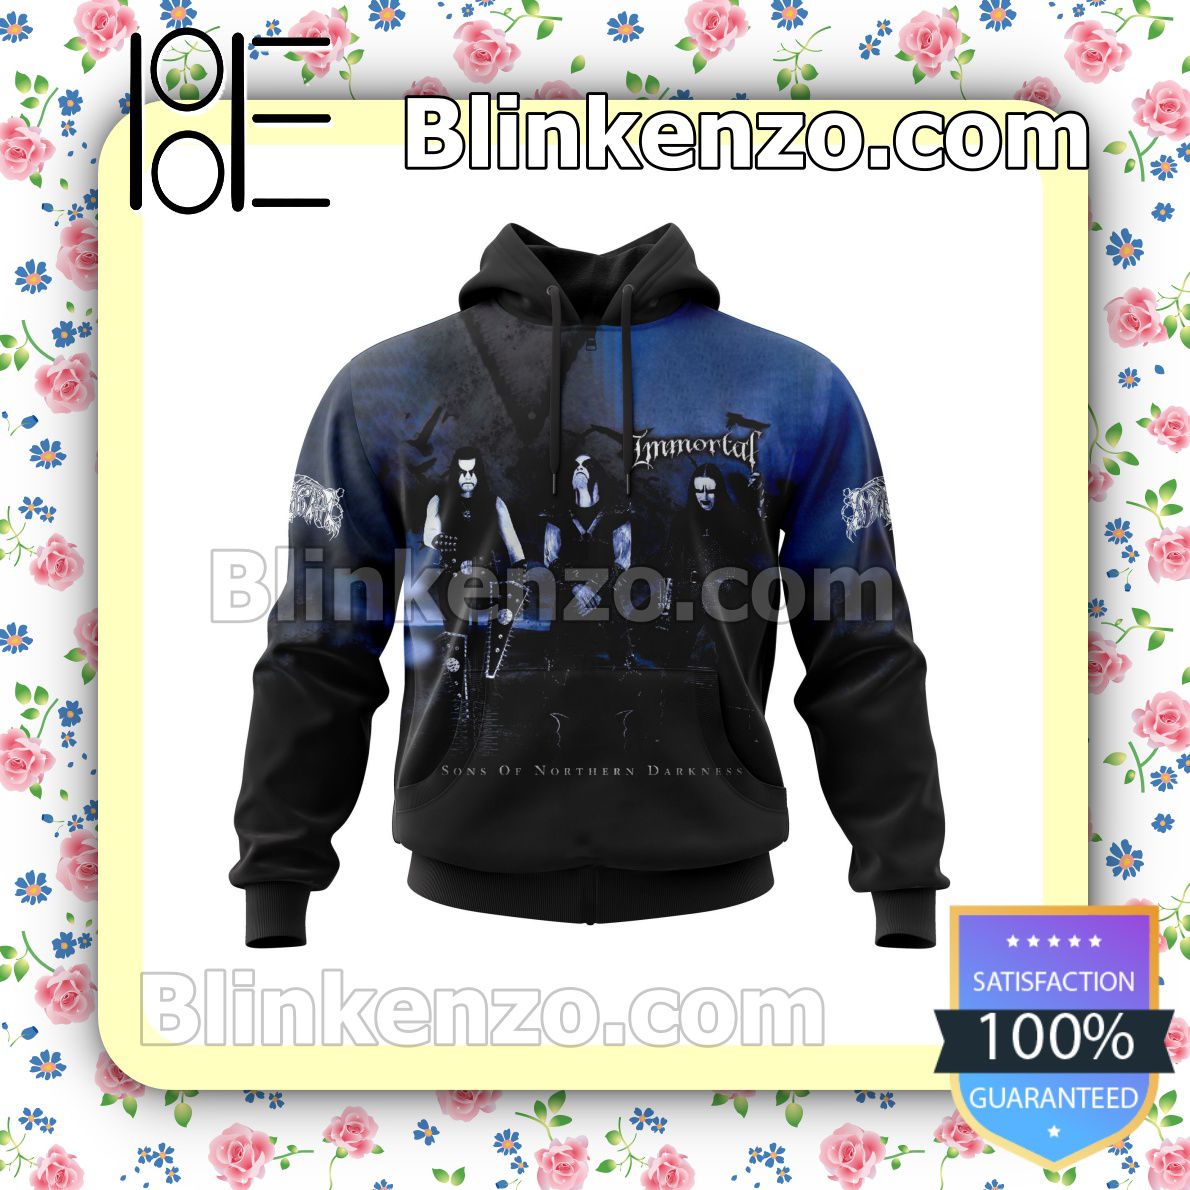 Personalized Immortal Sons Of Northern Darkness Album Cover Hooded Sweatshirt